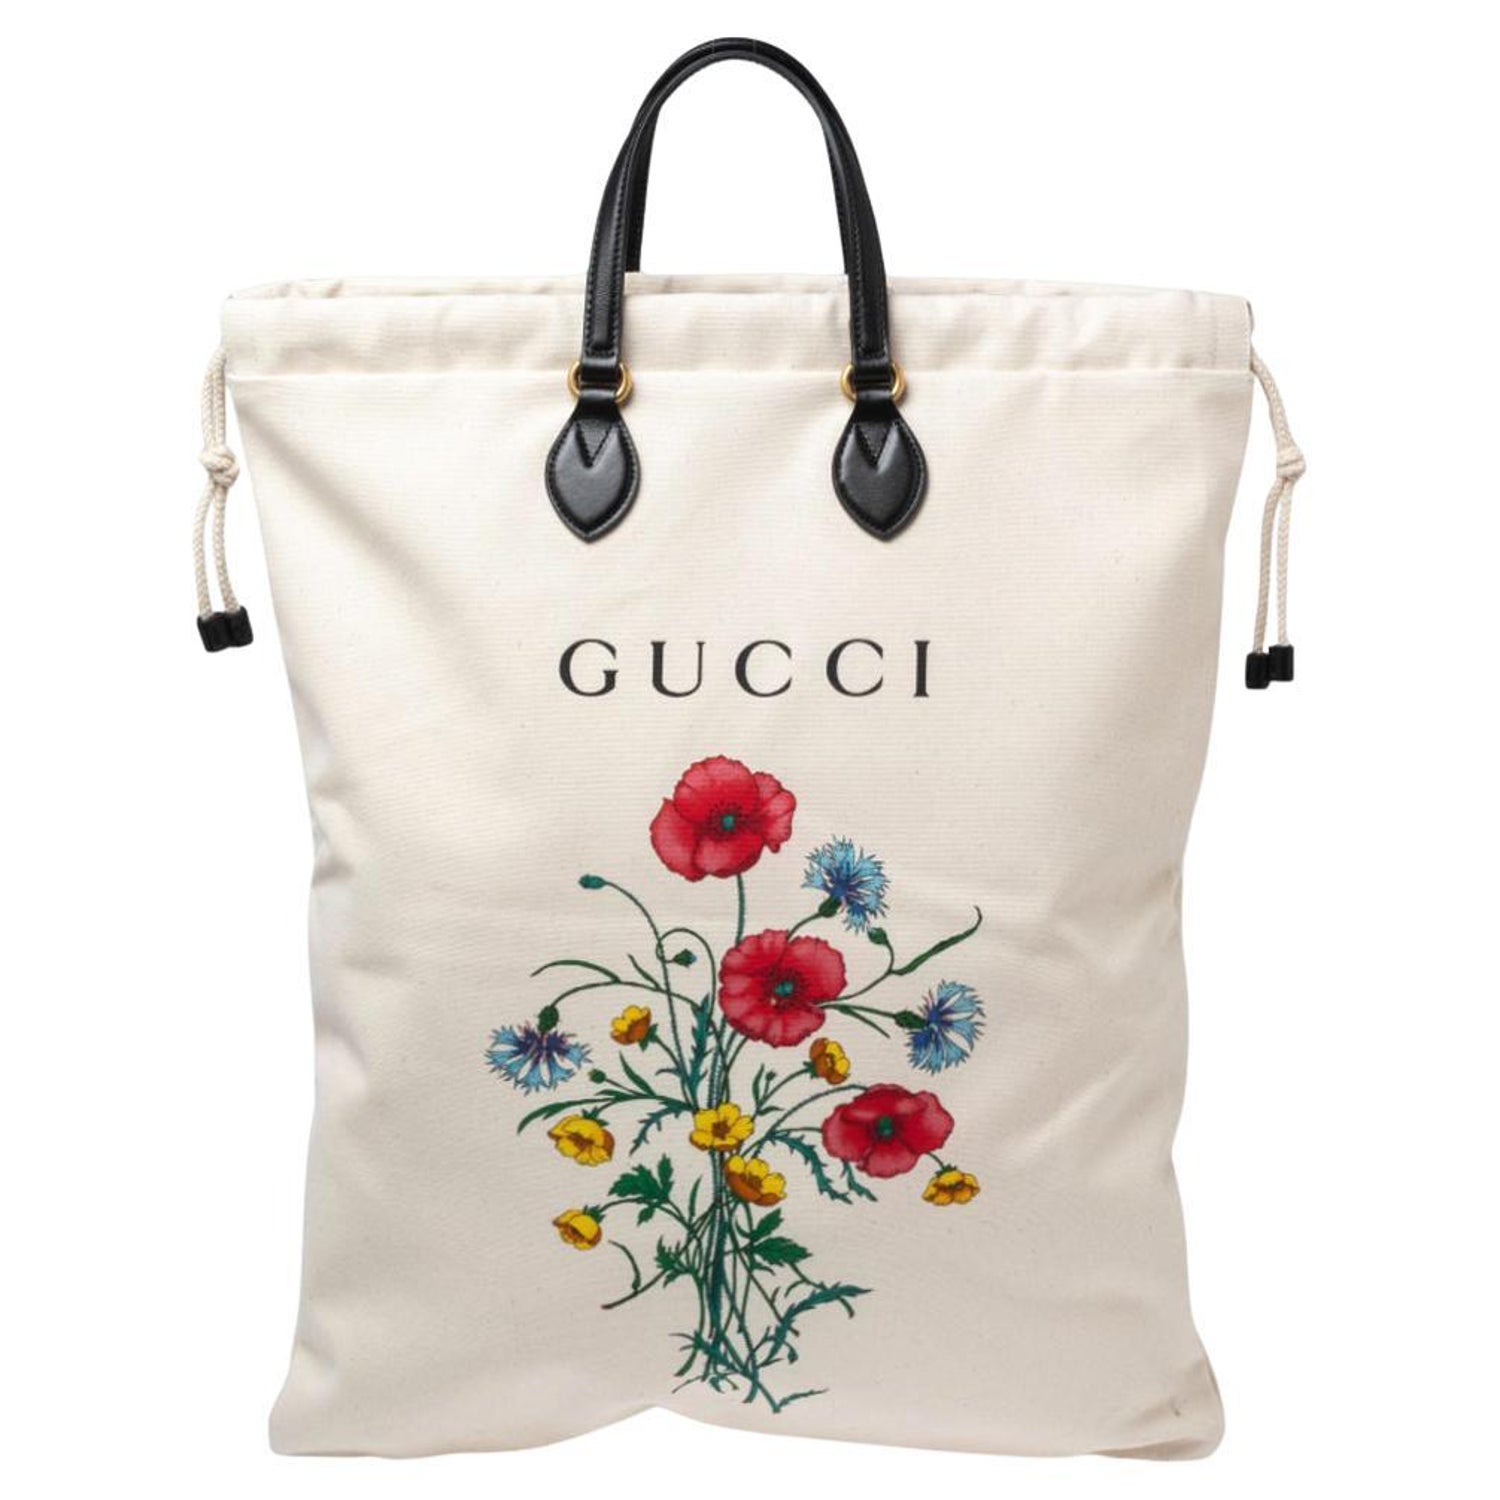 Gucci Chateau Marmont - For Sale on 1stDibs | gucci chateau marmont bag, chateau  marmont gucci, chateau marmont gucci bag